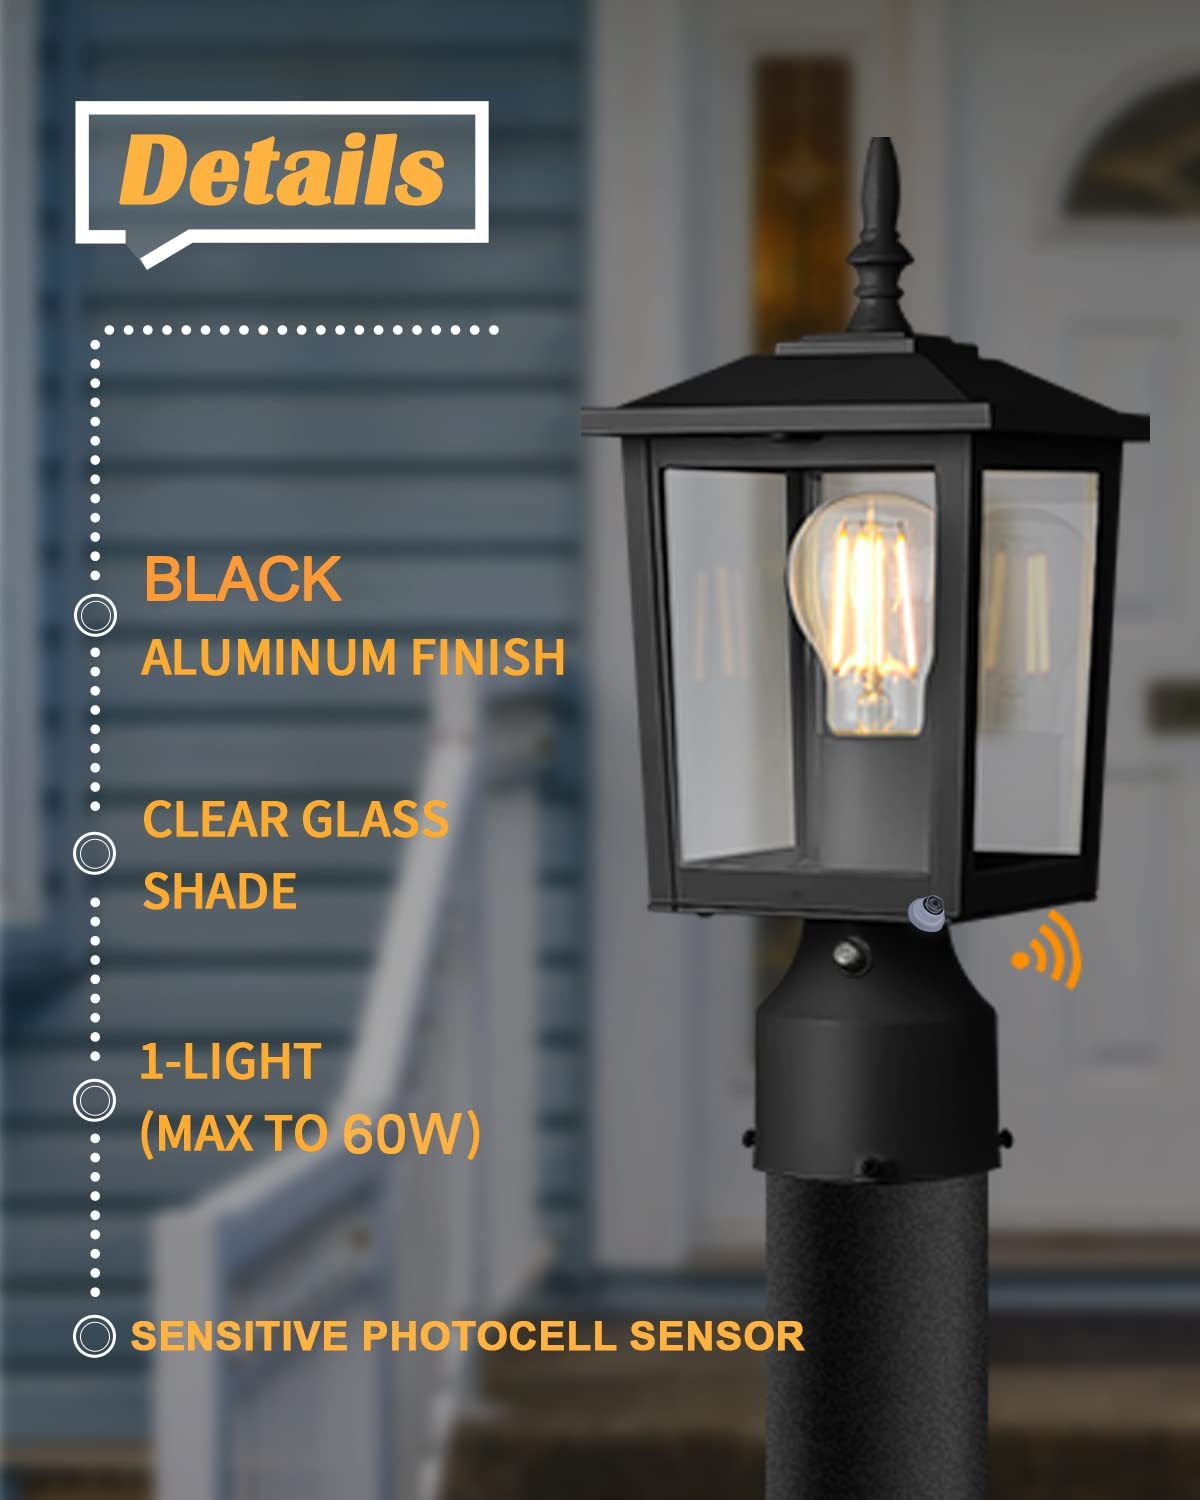 CINOTON Dusk to Dawn Outdoor Post Light Fixtures, Modern Exterior Post Lantern 6-Inch with Pier Mount Base, Aluminum Lamp with Clear Glass Waterproof for Garden Patio Pathway Deck